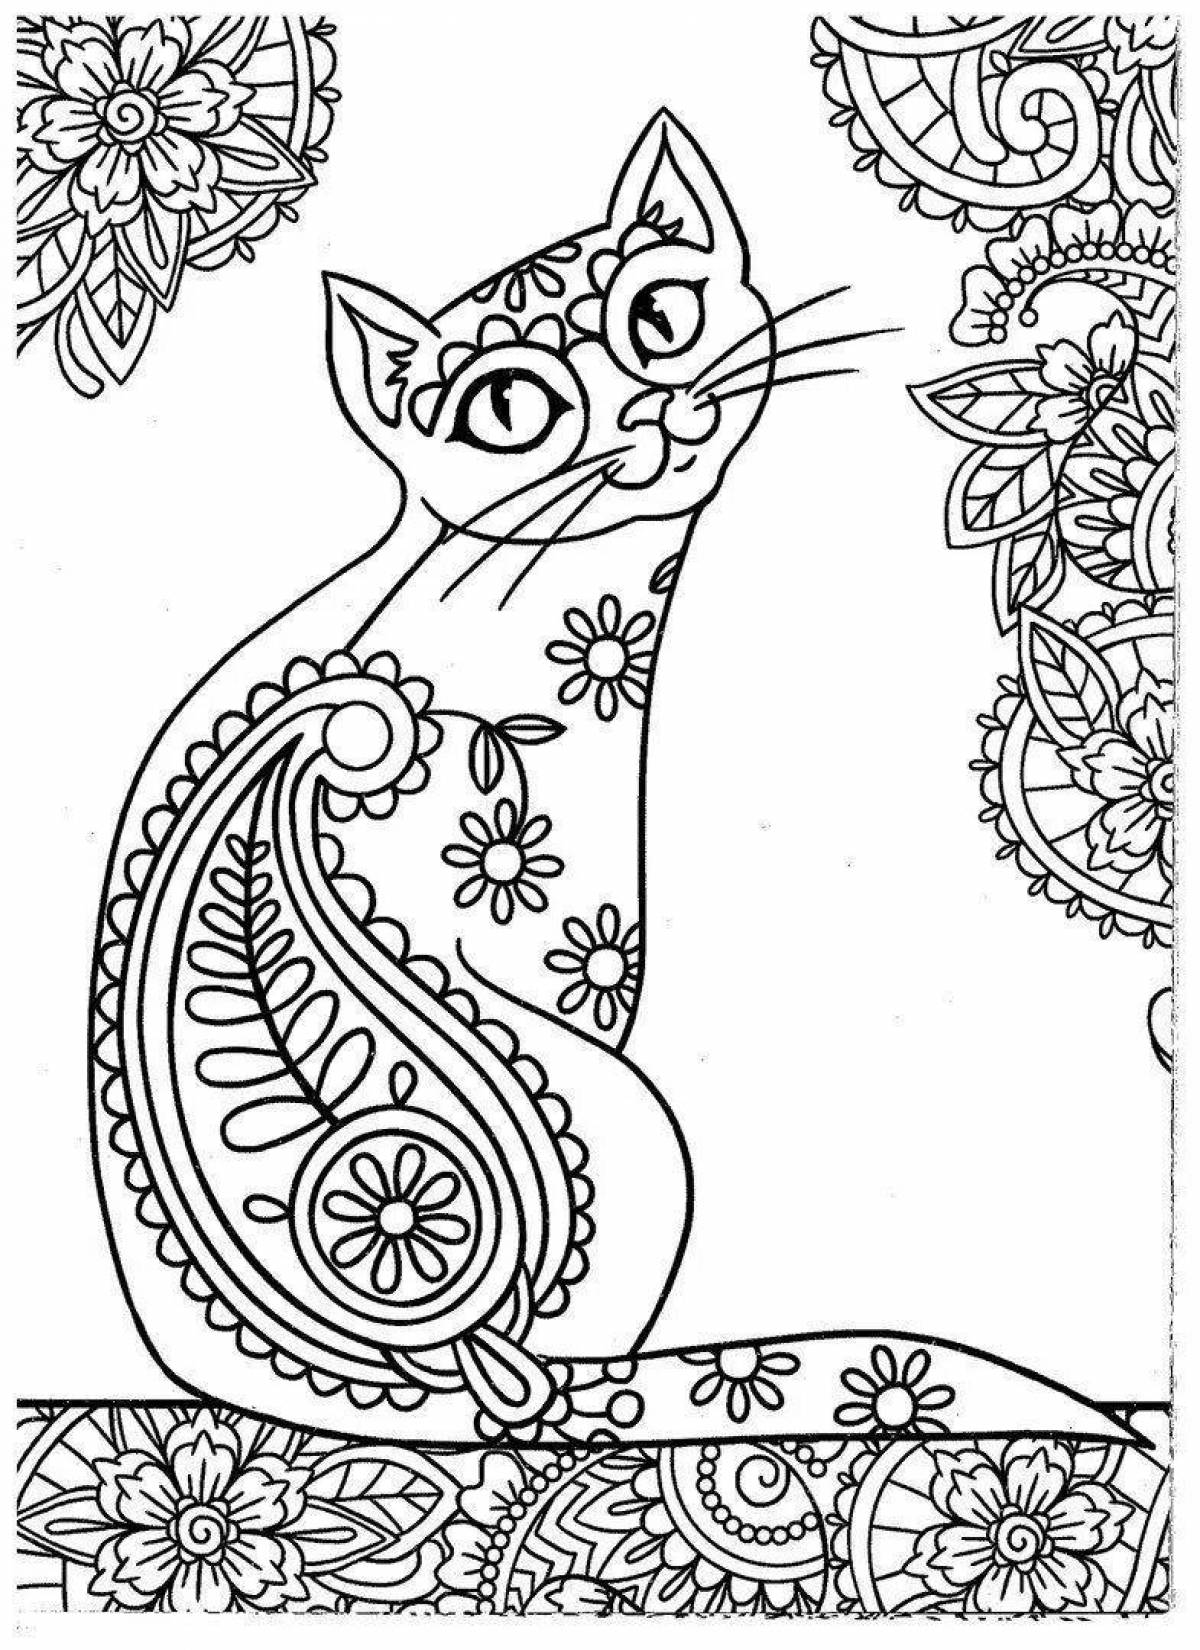 Adorable patterned cat coloring book